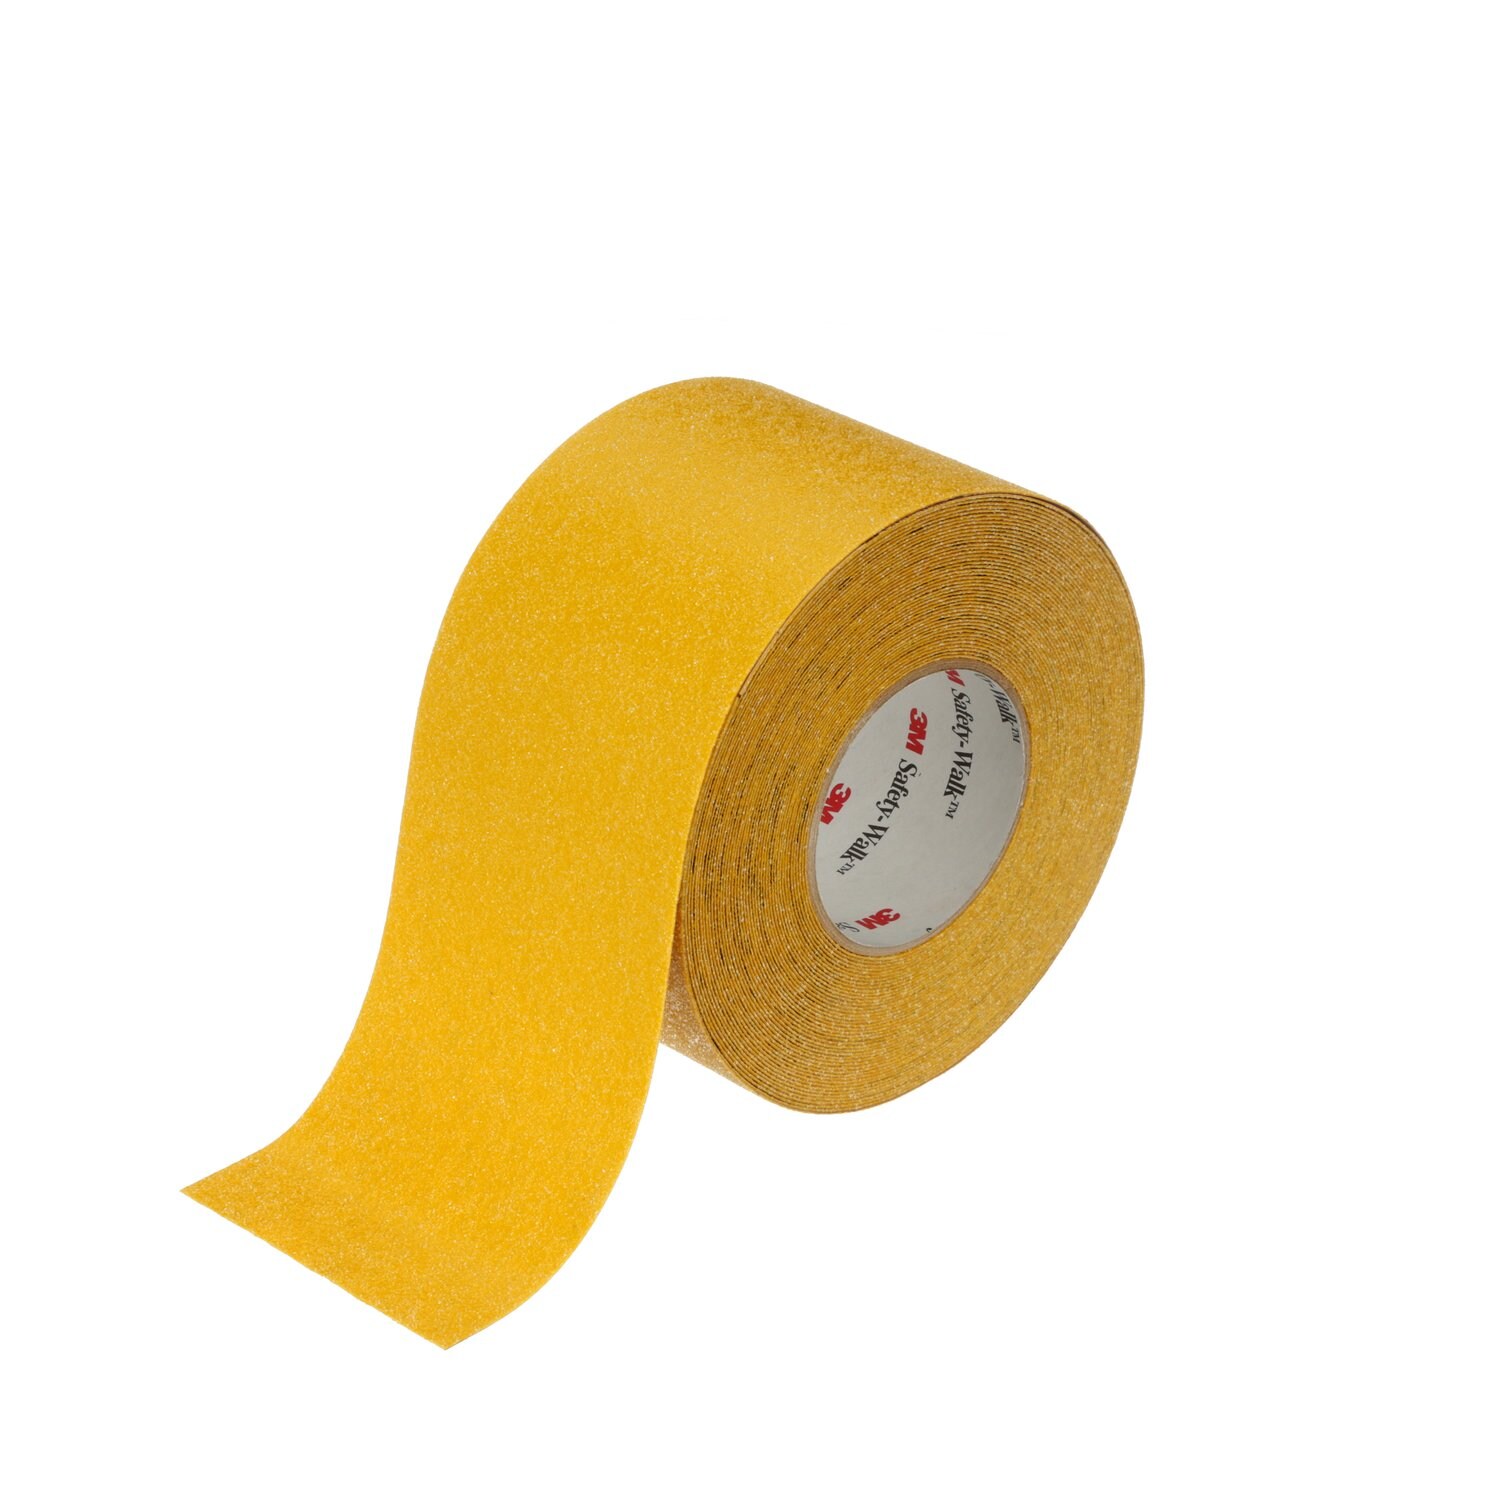 7100013312 - 3M Safety-Walk Slip-Resistant General Purpose Tapes & Treads 630,
Safety Yellow, 2 inch Wide & Over, Configurable Roll